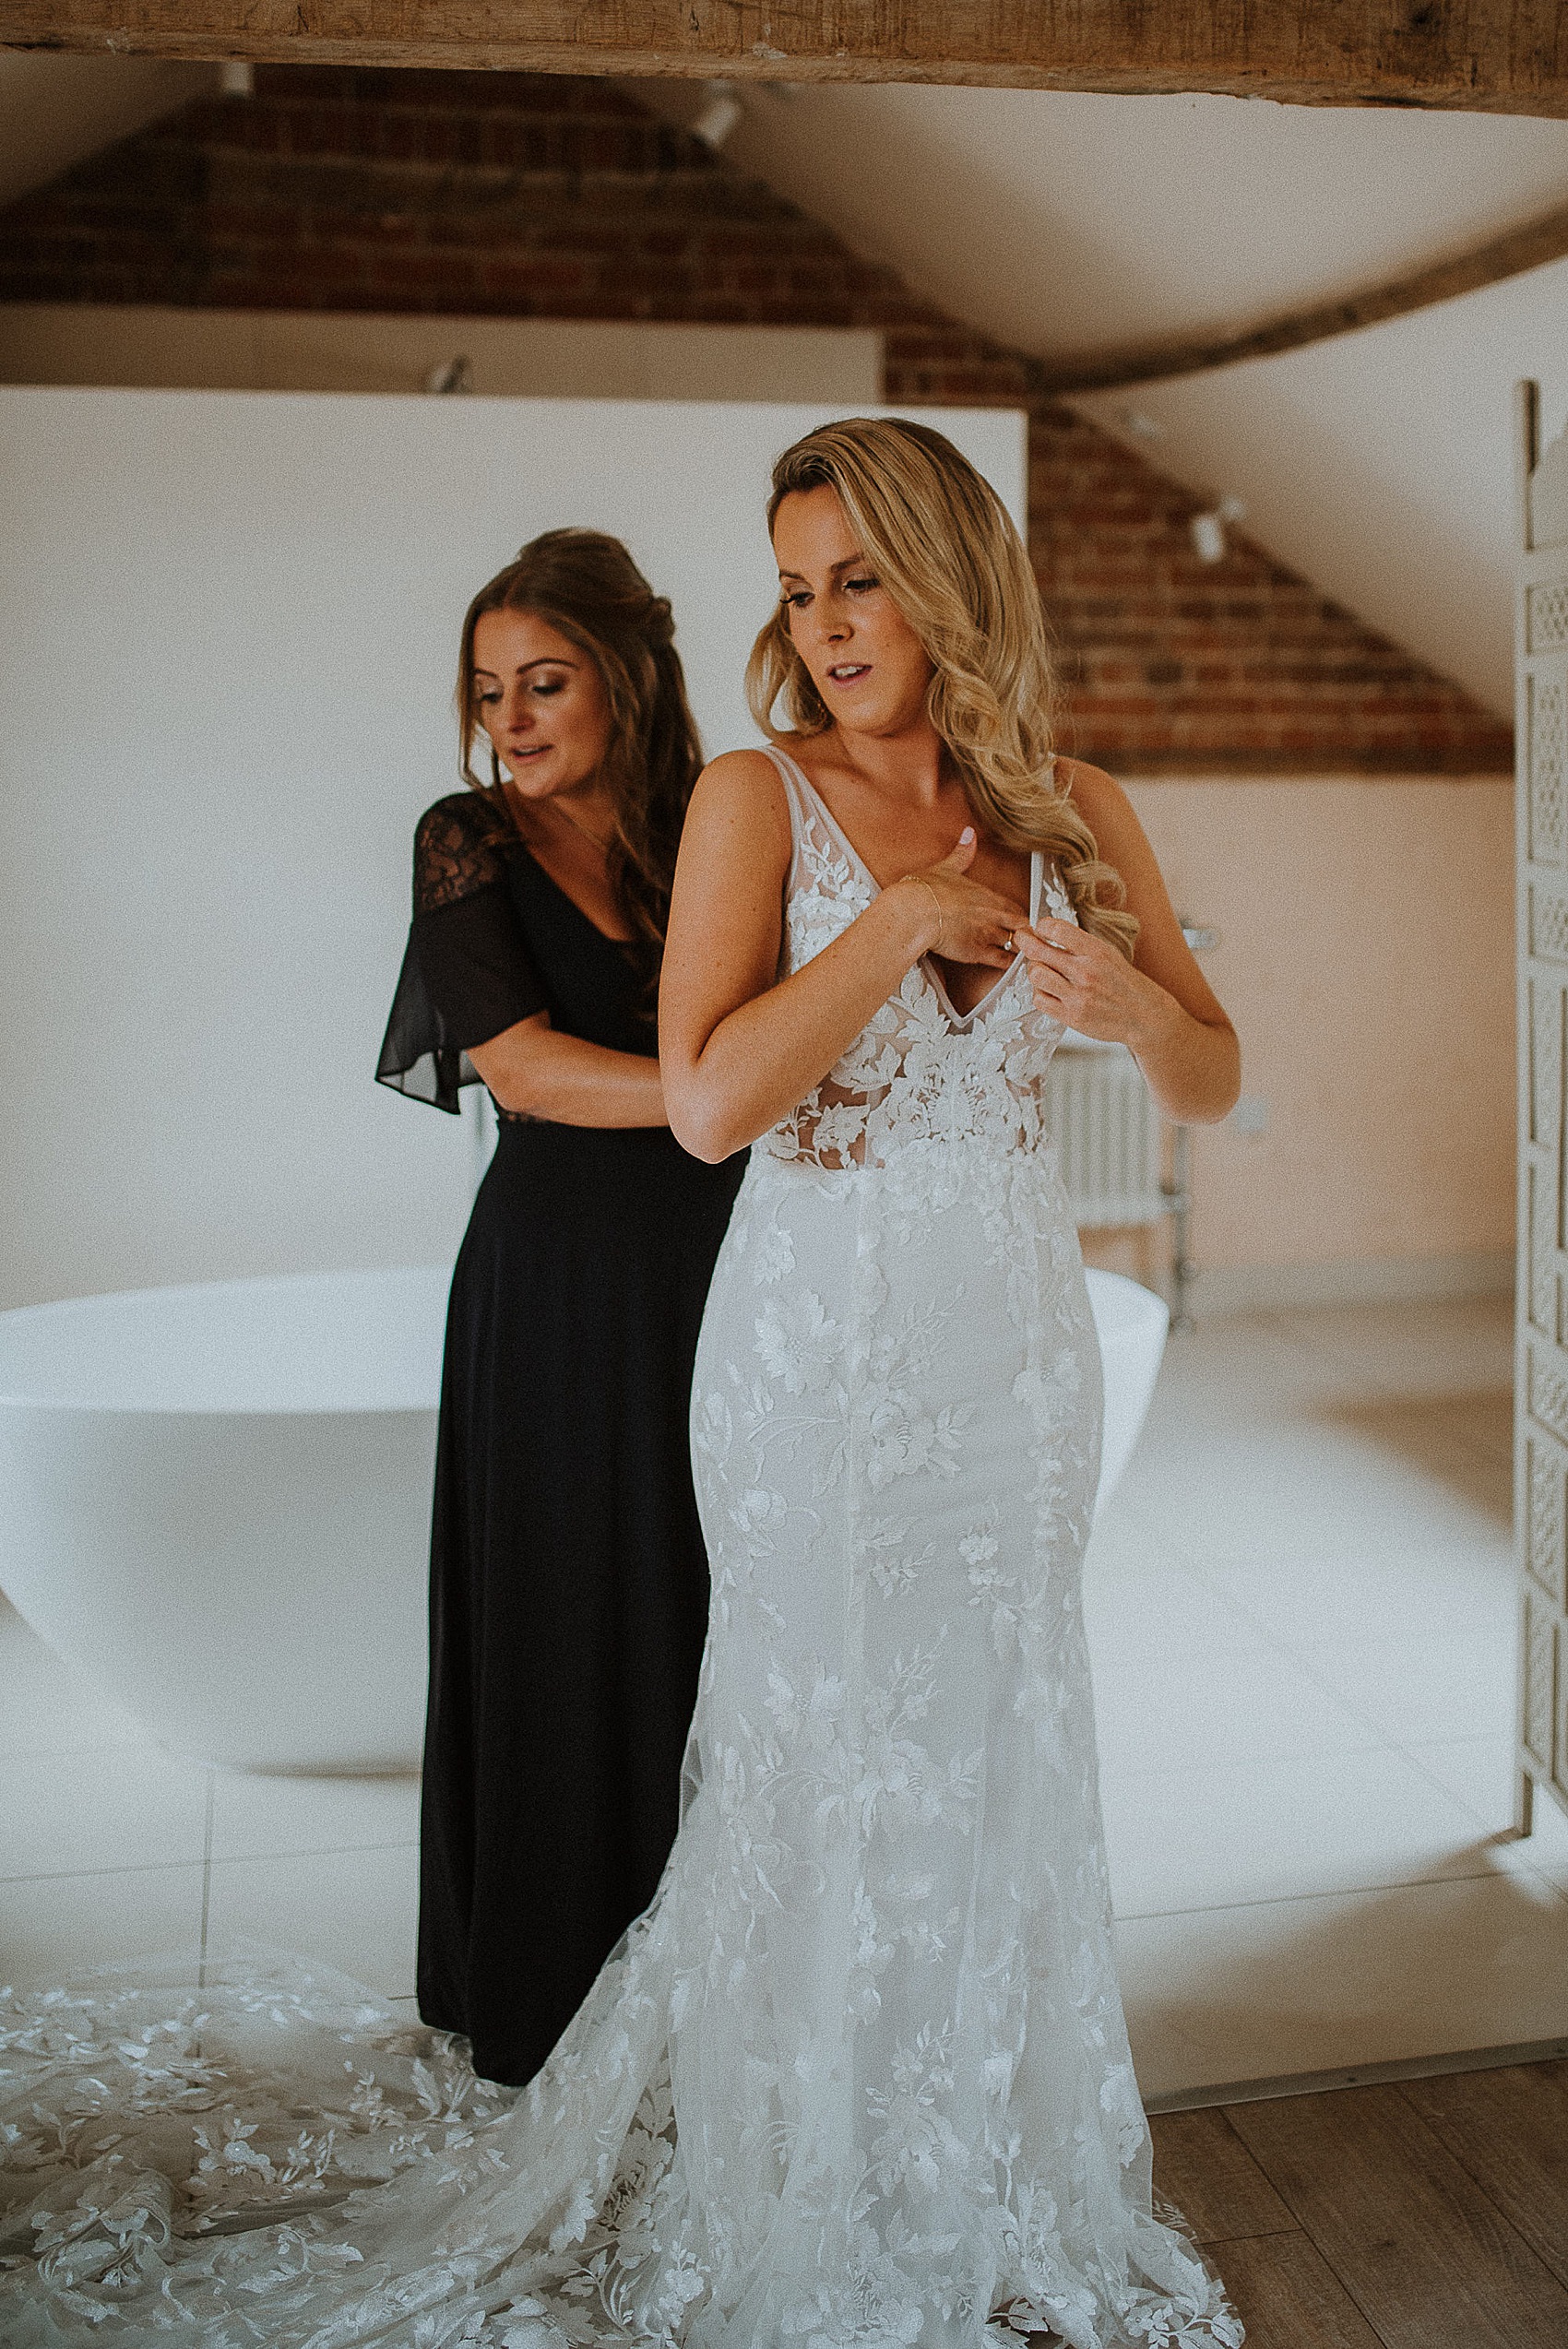 Made With Love Dress Barn Wedding  - A Made With Love Lace Dress for a Laid Back & Glamorous Australian Inspired Barn Wedding